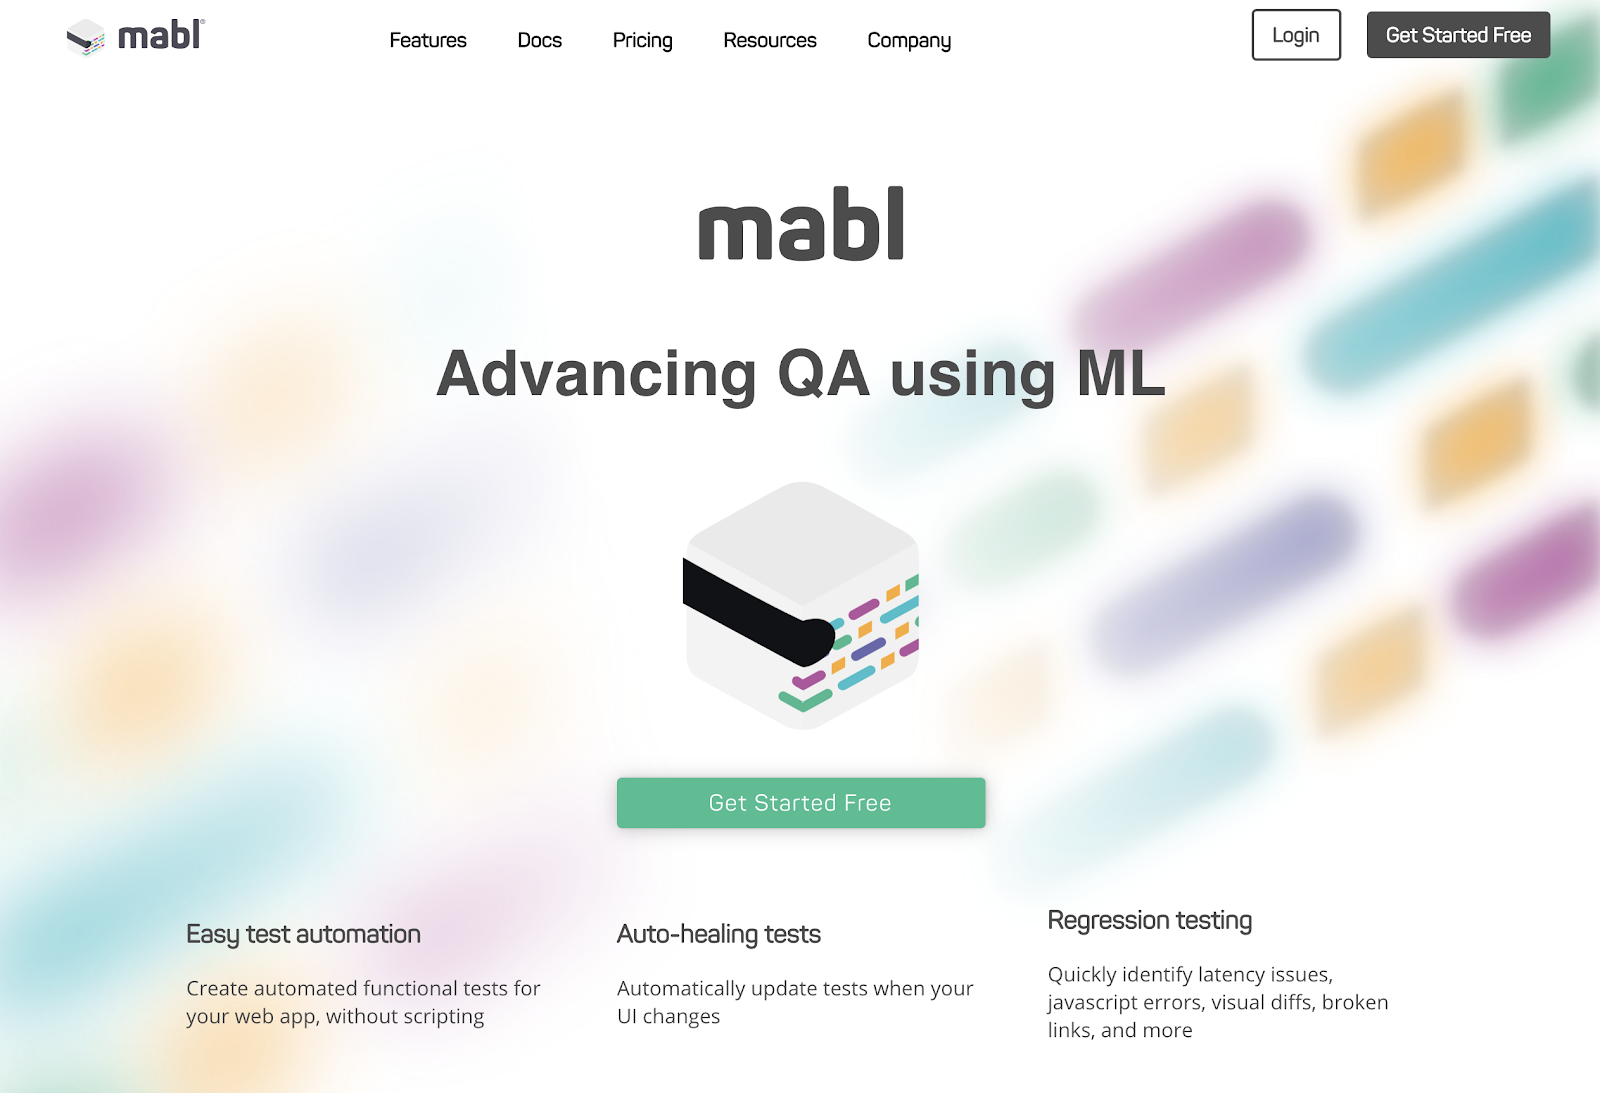 Mabl does loads of other cool stuff including automated testing. It's one of our favorite services and definitely one to check out